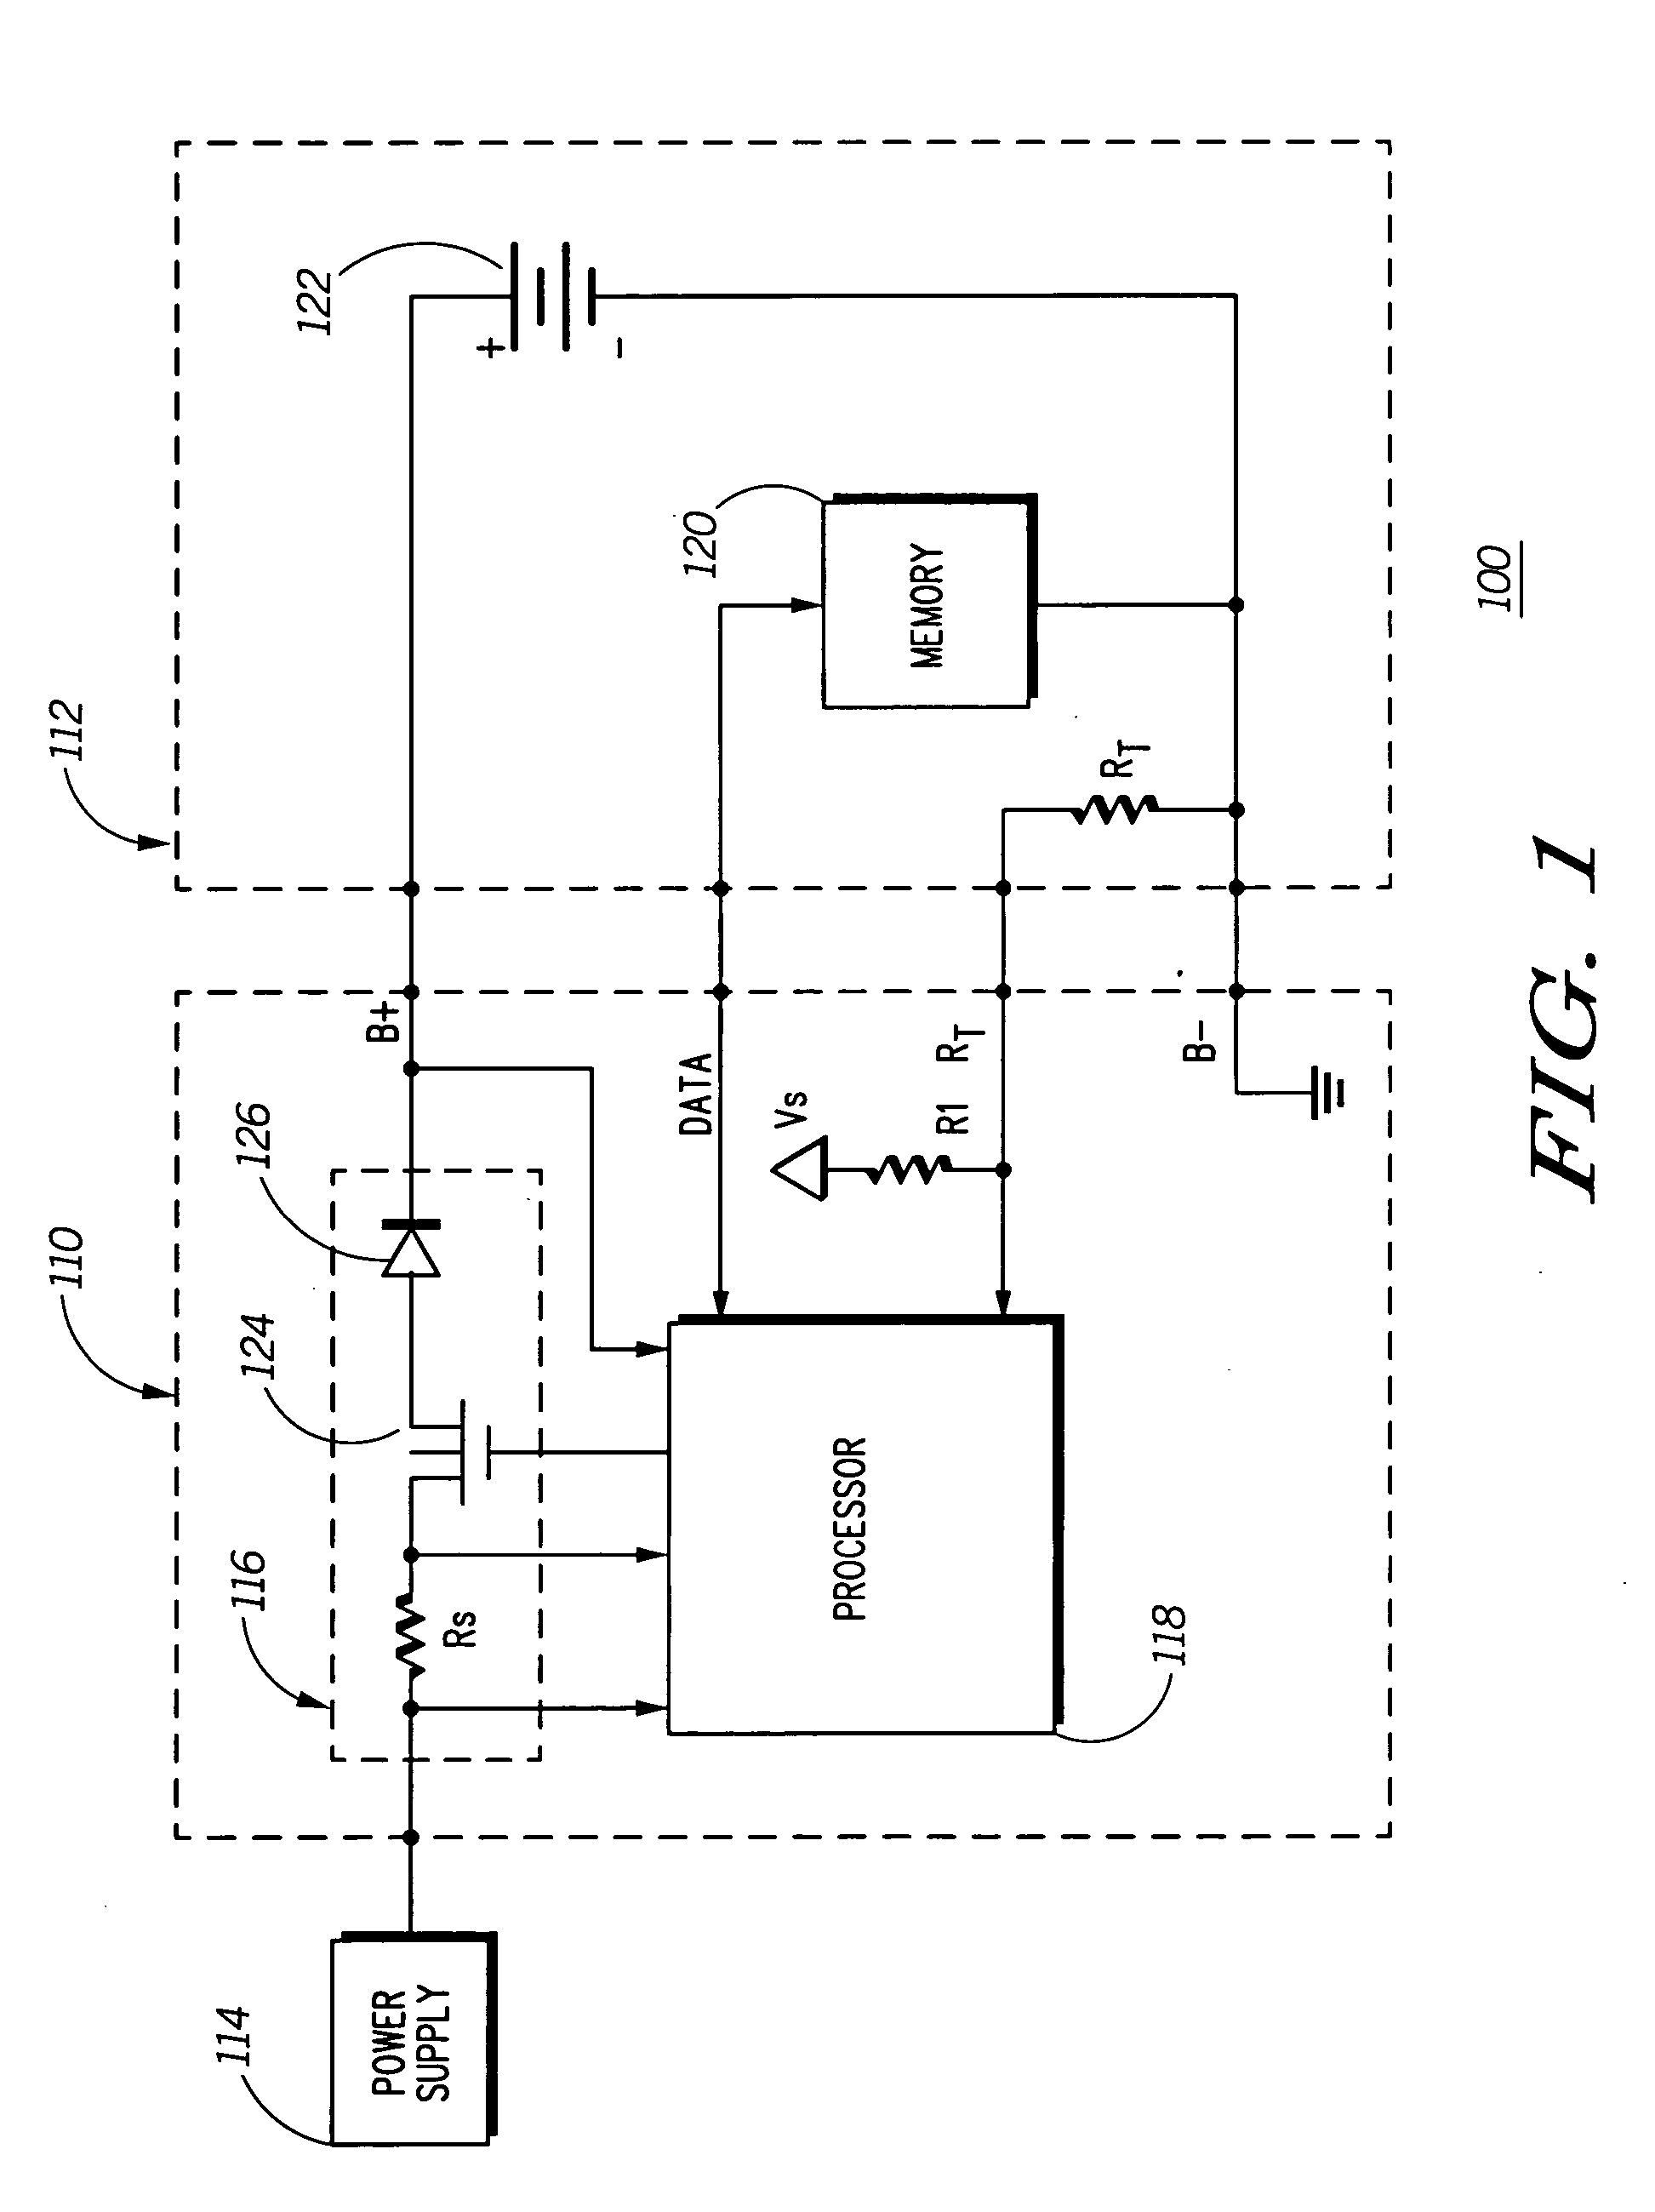 Method and system for charging a battery